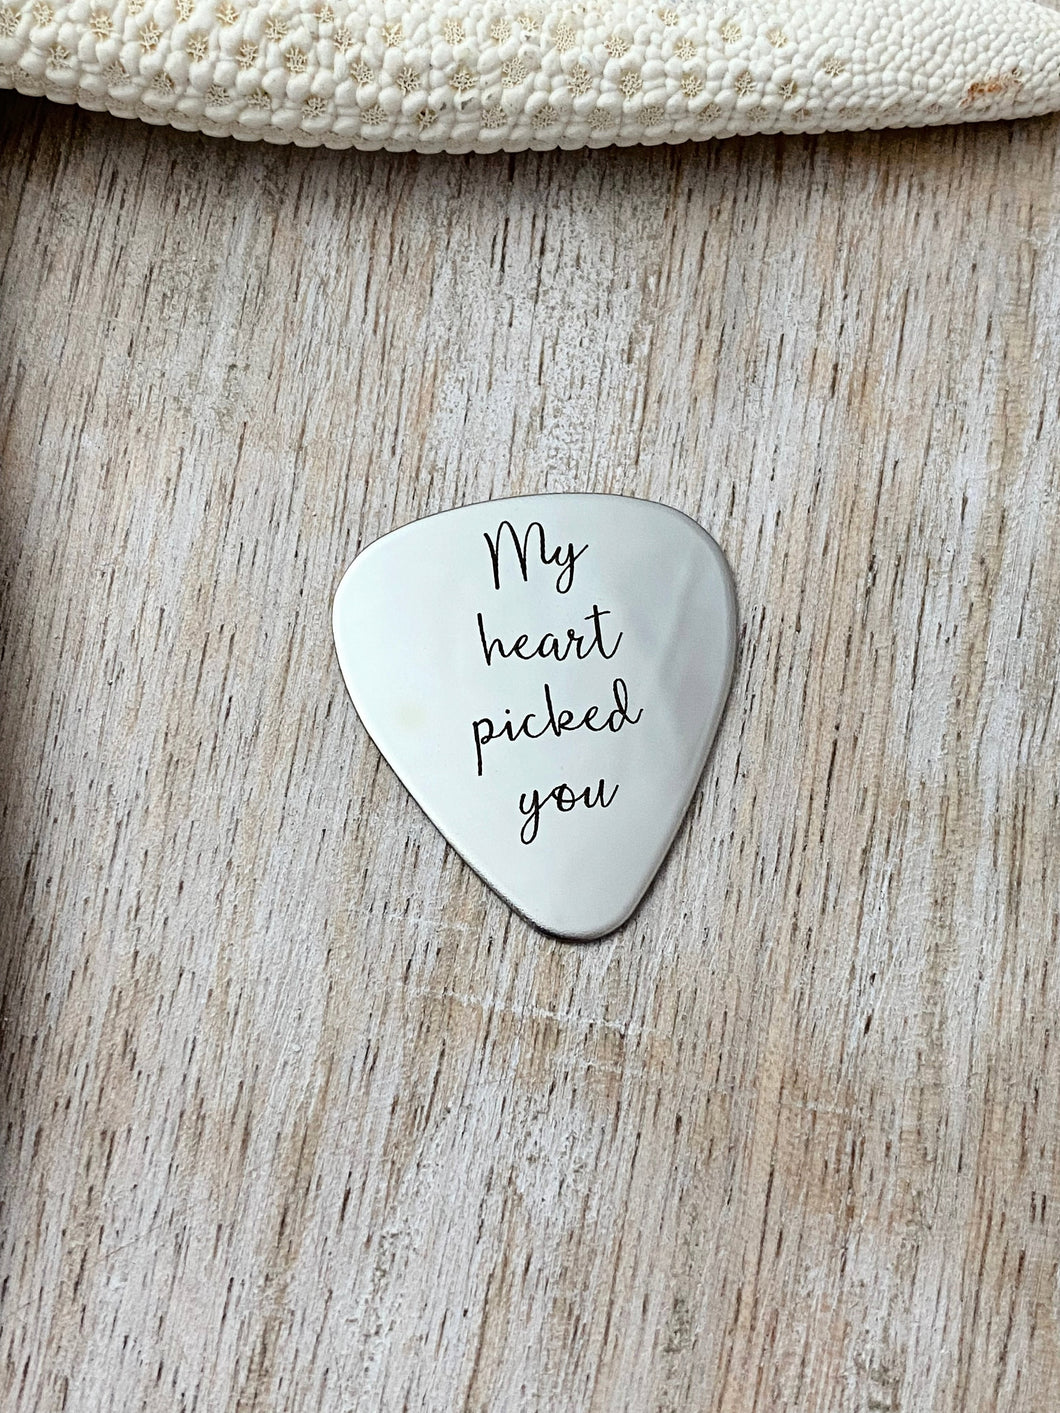 My heart picked you engraved guitar pick - Stainless steel - gift for him - Silver tone pick gift for husband Valentine's Day gift